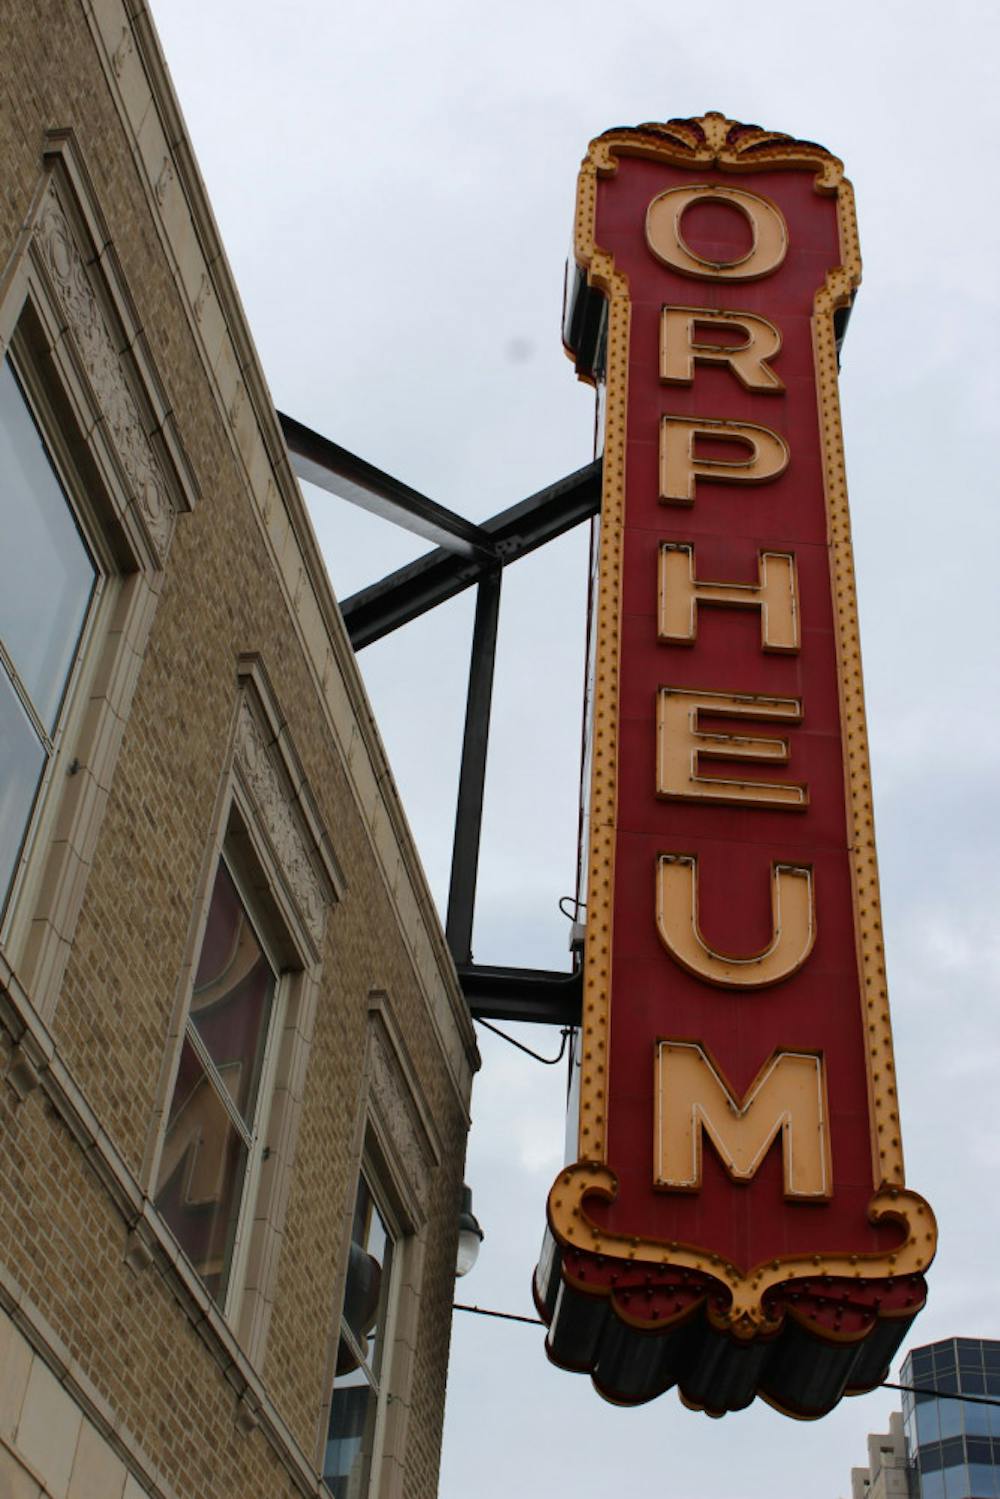 <p dir="ltr">The Orpheum Theatre board announced Aug. 25 that they will not feature “Gone with the Wind,”during the venue’s summer series next year.&nbsp;Despite criticism the Orpheum has received for its recent change to its summer series, the theater said they will feature more recent and classic films in their 2018 movie series, which will be announced in the spring.</p>